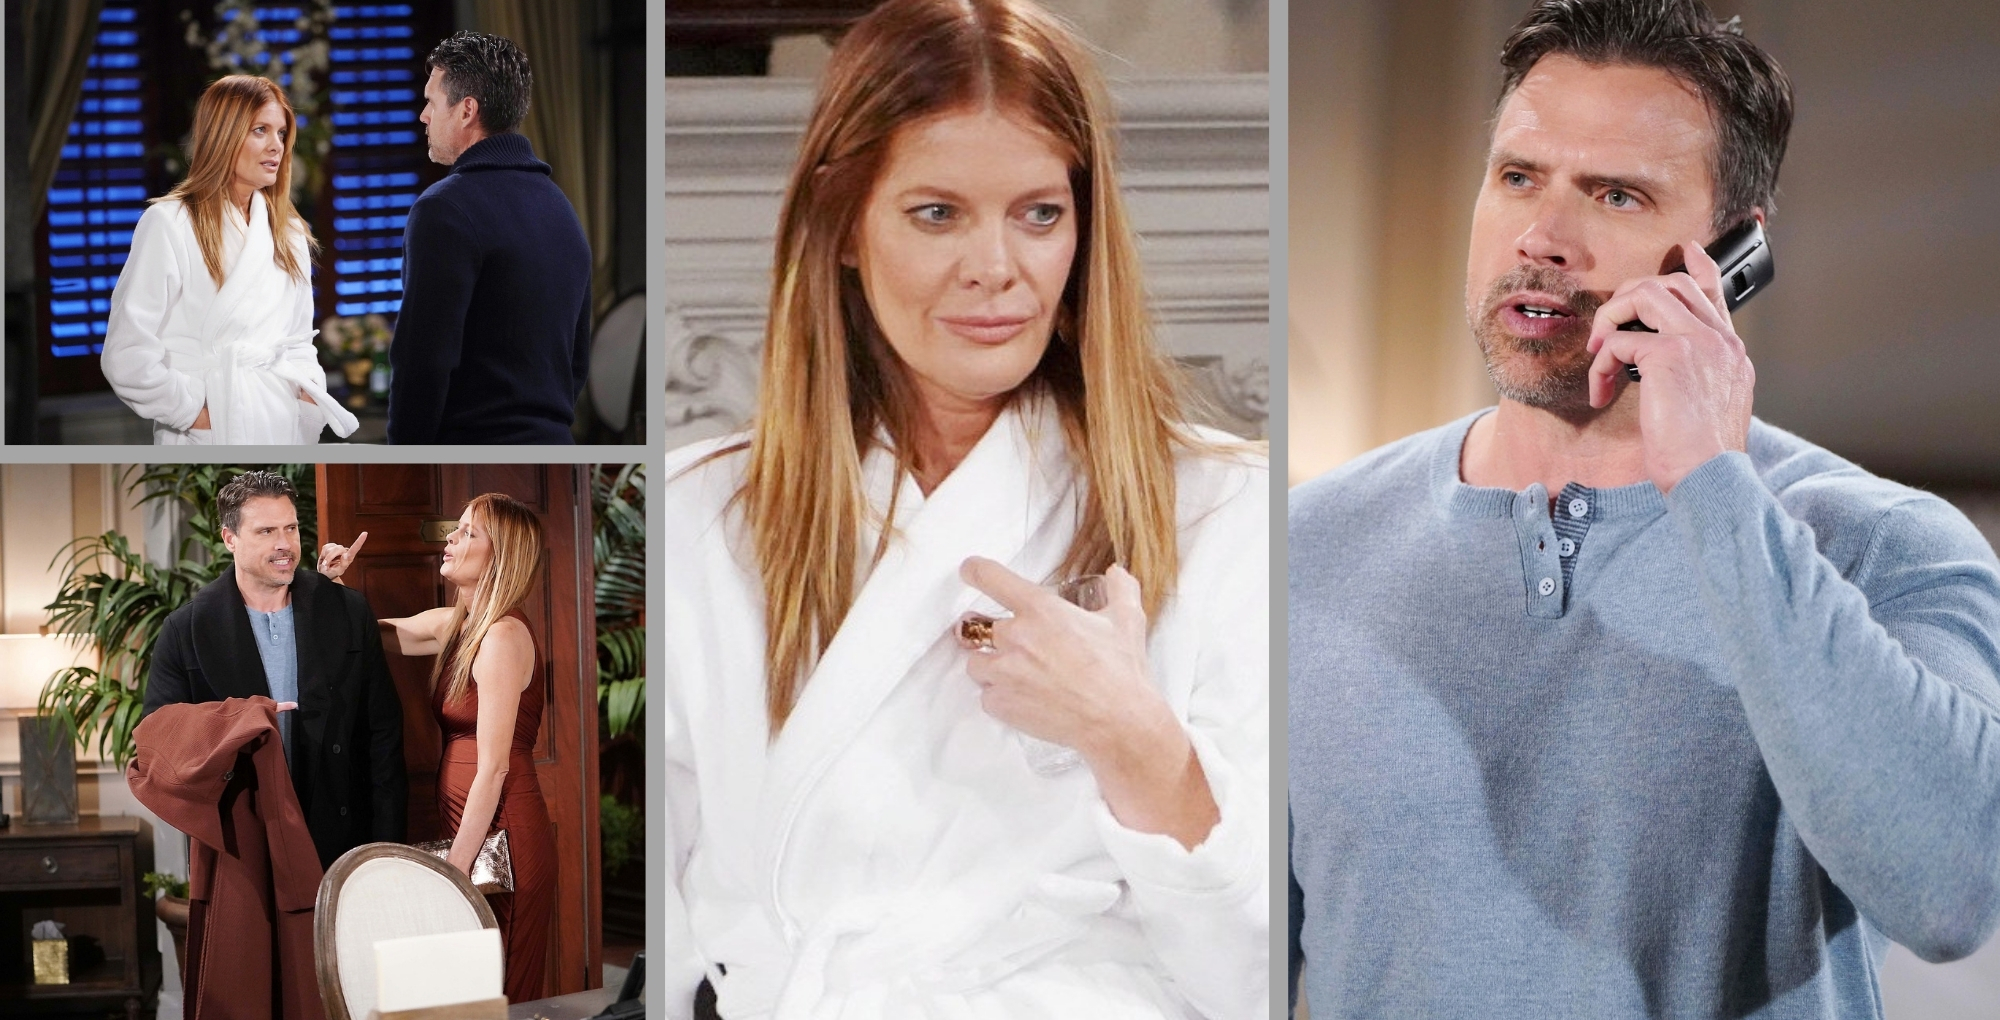 The Young and the Restless spoilers photos show Nick taking care of Phyllis.